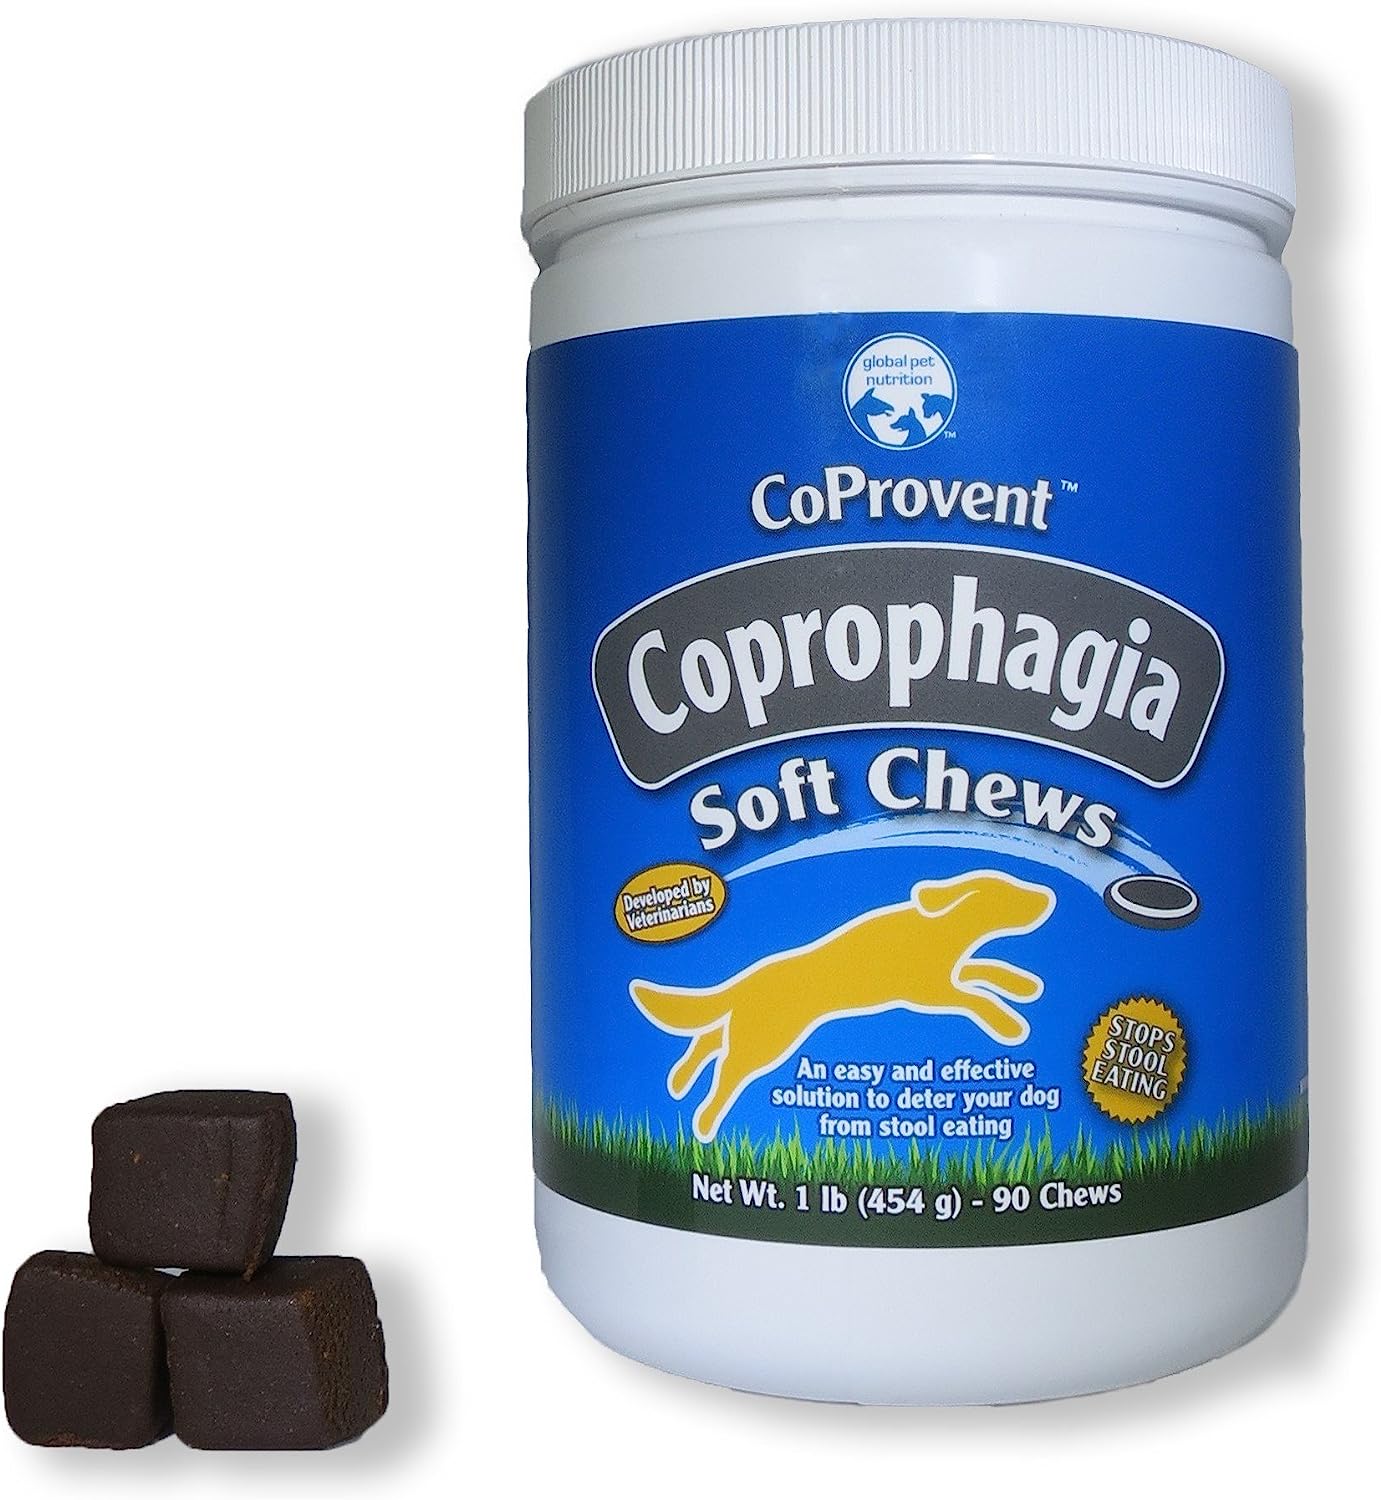 9. Global Pet Coprovent Coprophagia Soft Chews for Dogs